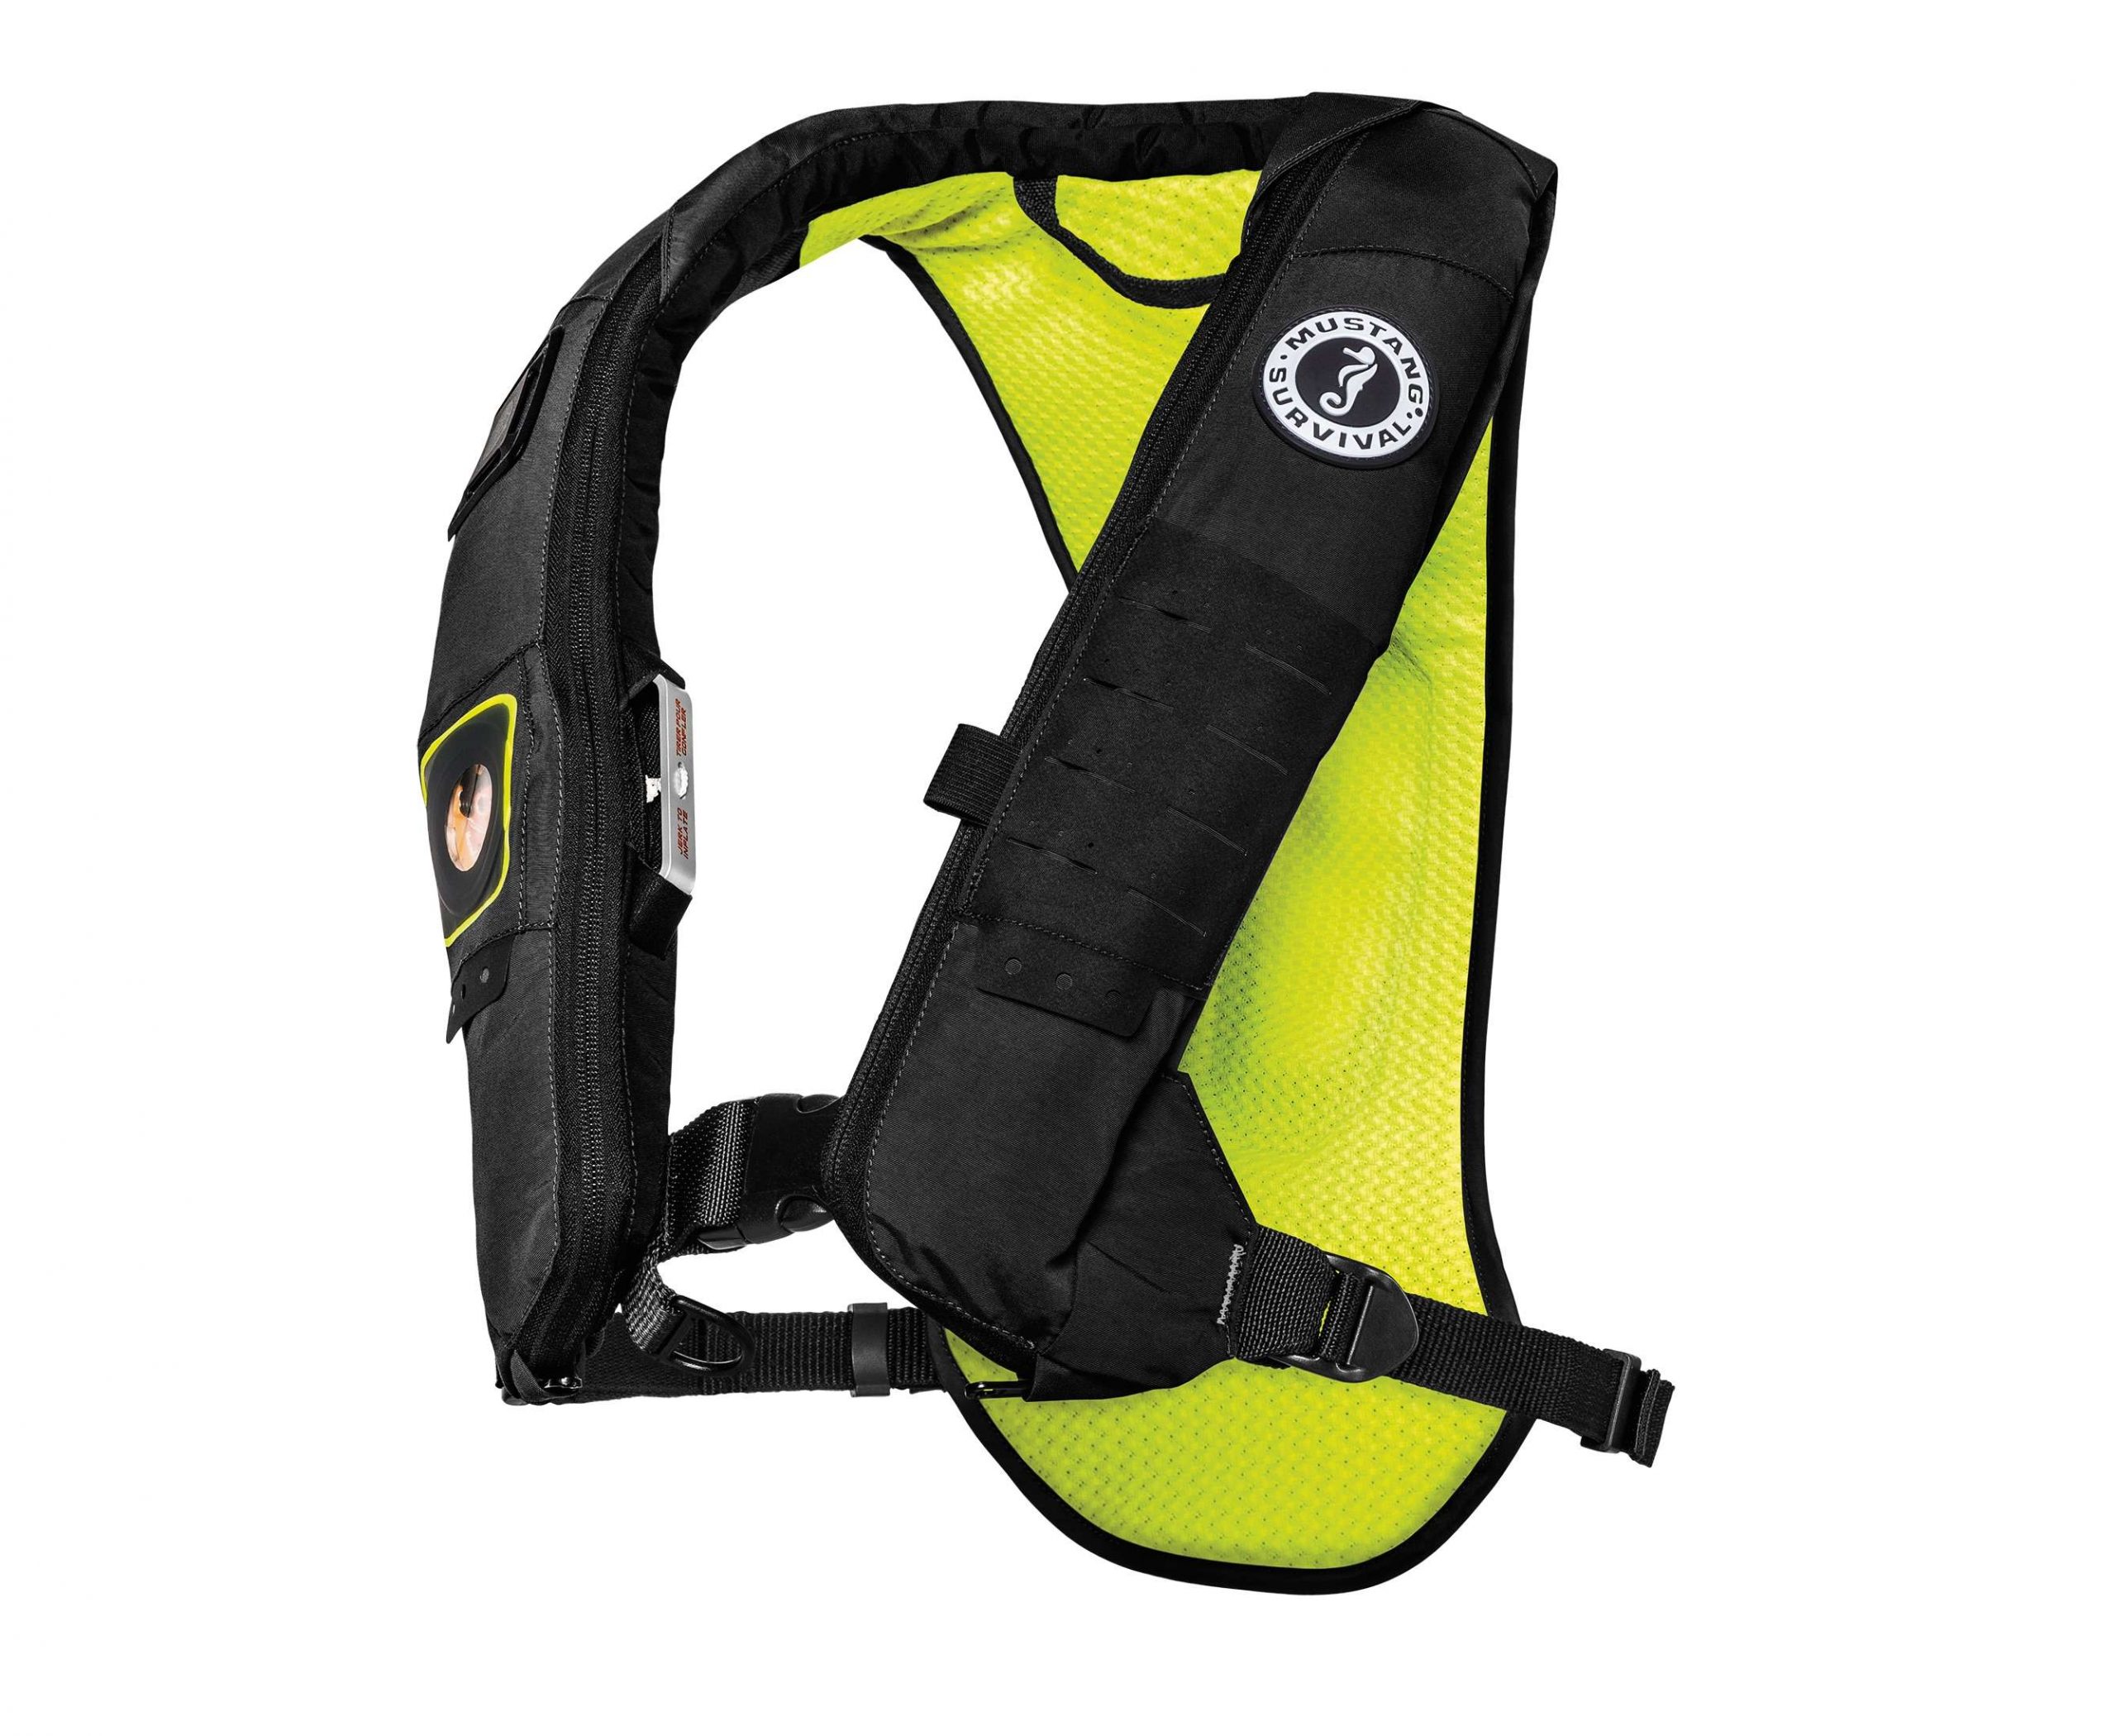 <b>Mustang Survival</b><br>	Elite 28K<br>	Mustang's new versatile inflatable PFD was specifically designed with kayak fishing in mind. Like all Mustang PFDs, it uses Hydrostatic Inflator Technology that only inflates when submerged. Also features lightweight outer shell and wicking mesh liner back vent for breathability. 